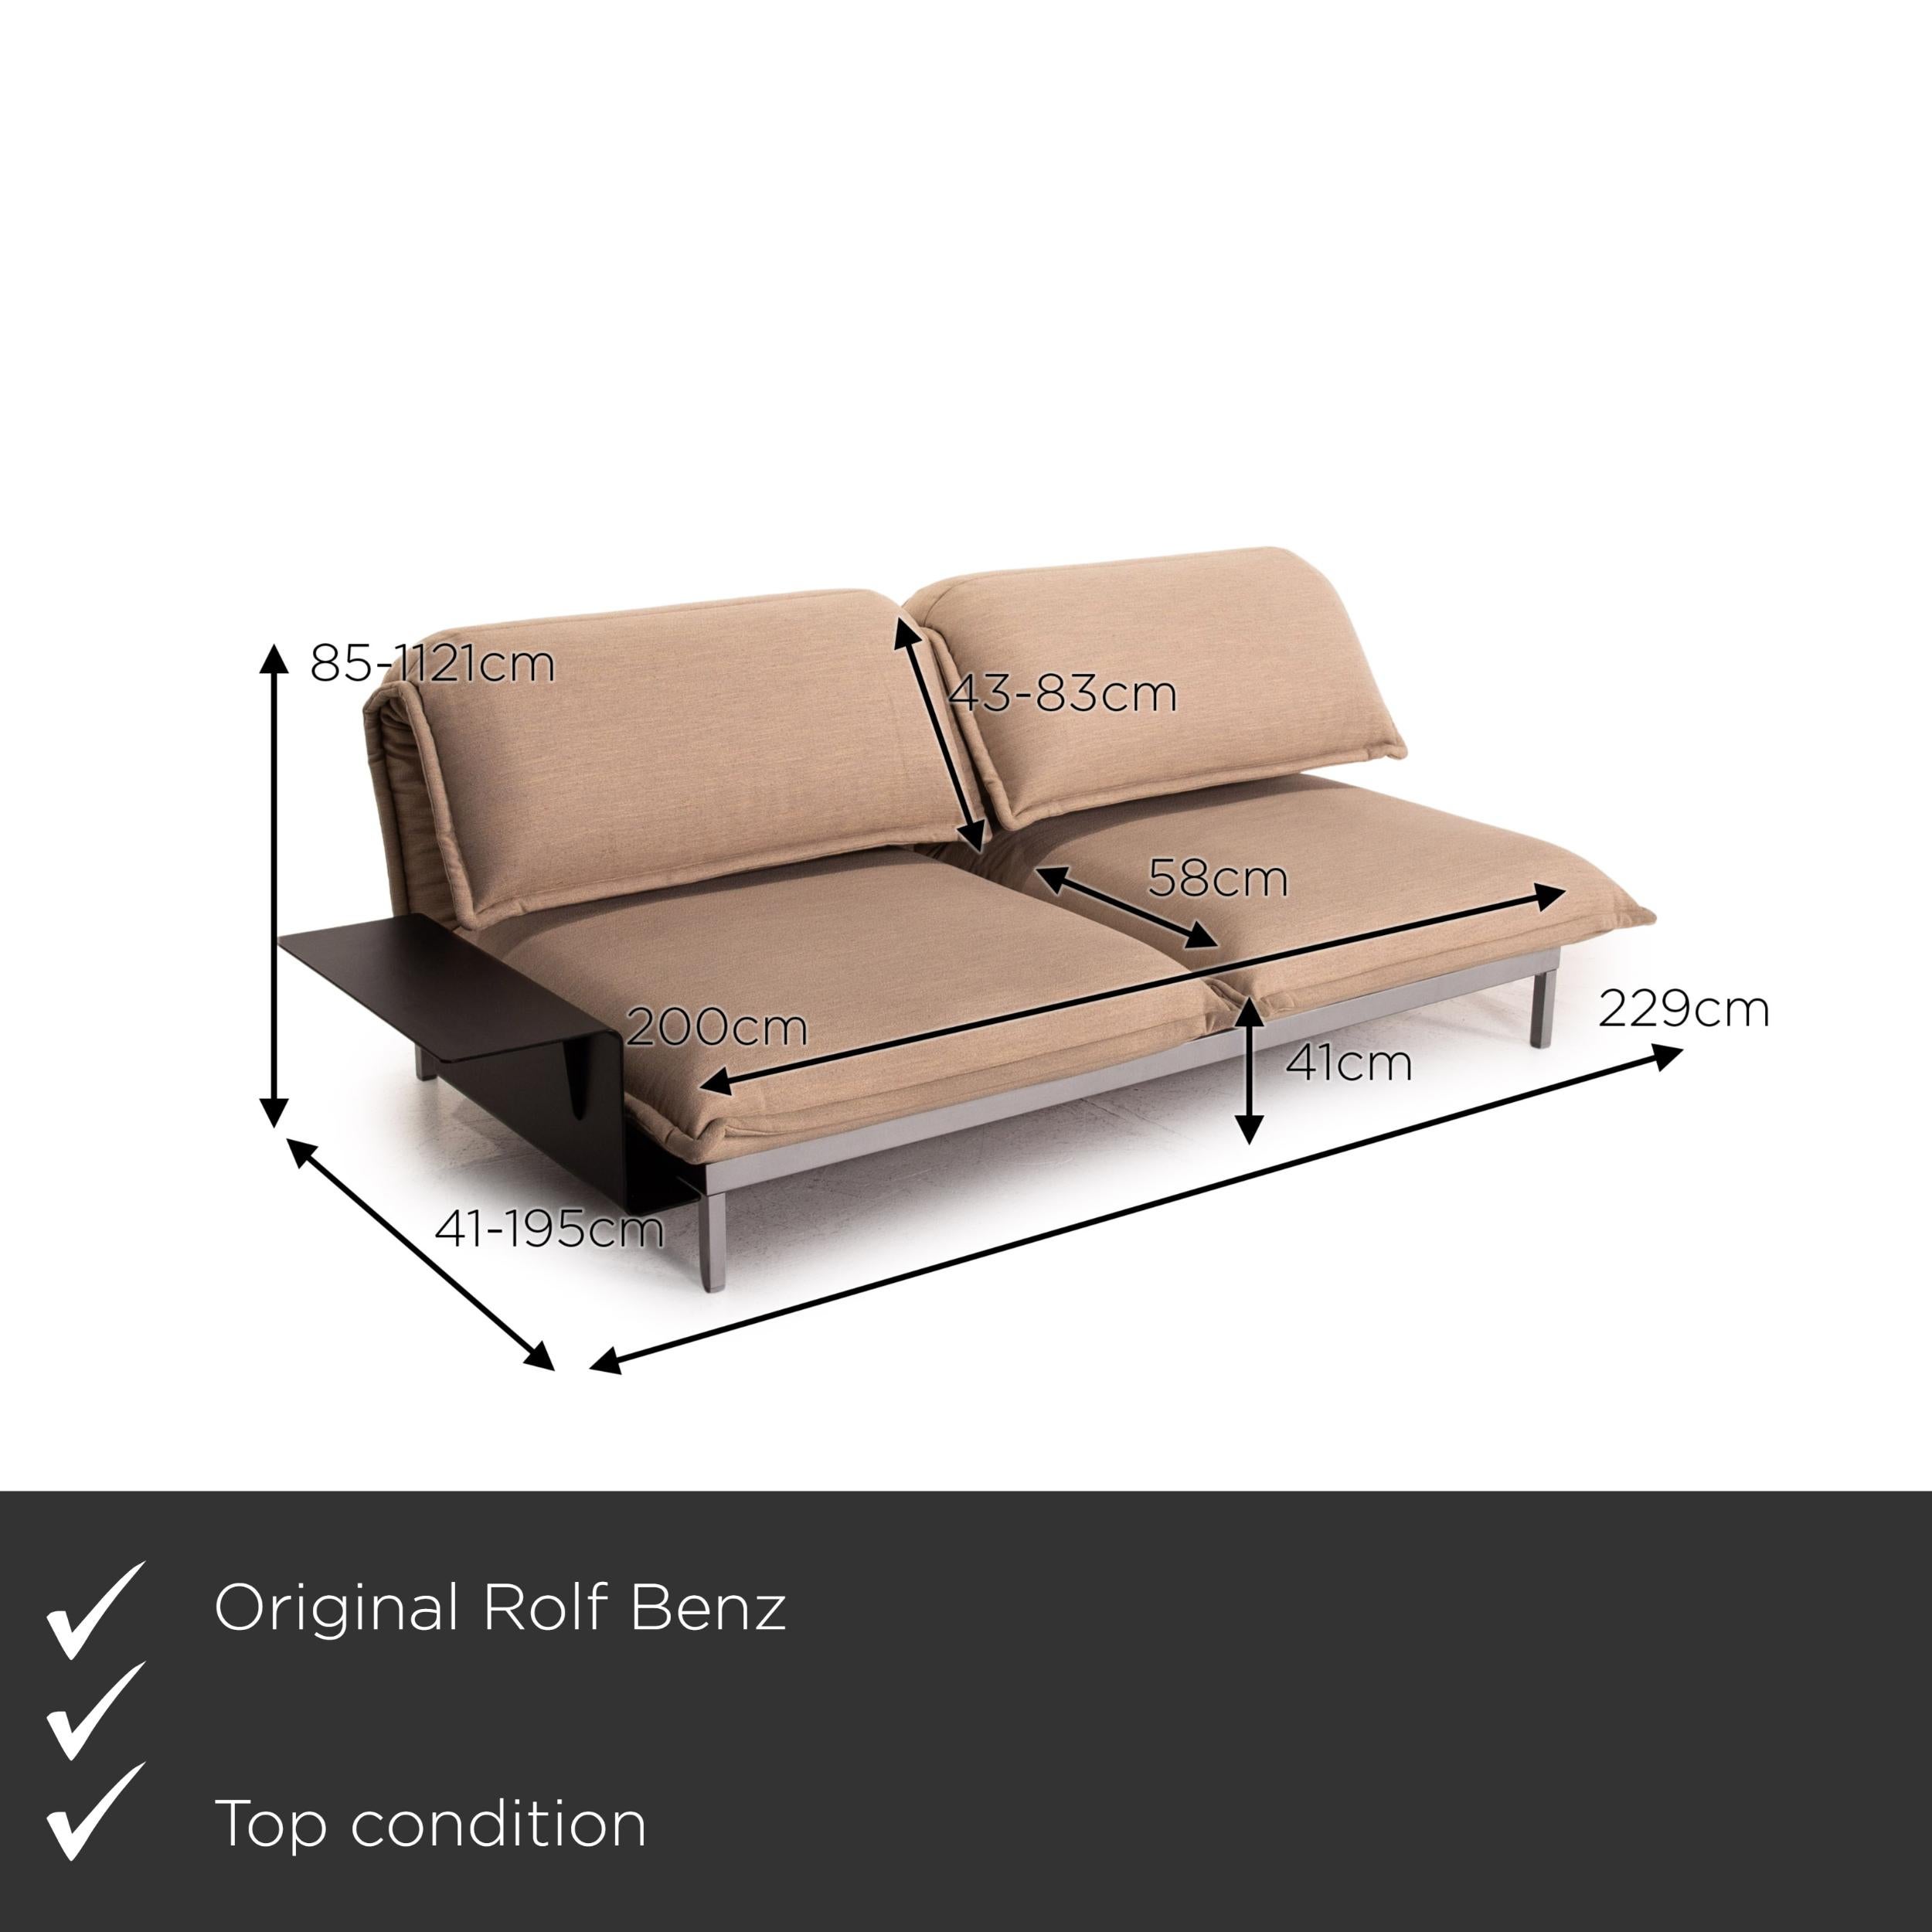 We present to you a Rolf Benz Nova fabric sofa beige sleeping function relaxation function sofa bed.


 Product measurements in centimeters:
 

Depth: 41
Width: 229
Height: 85
Seat height: 41
Rest height:
Seat depth: 58
Seat width: